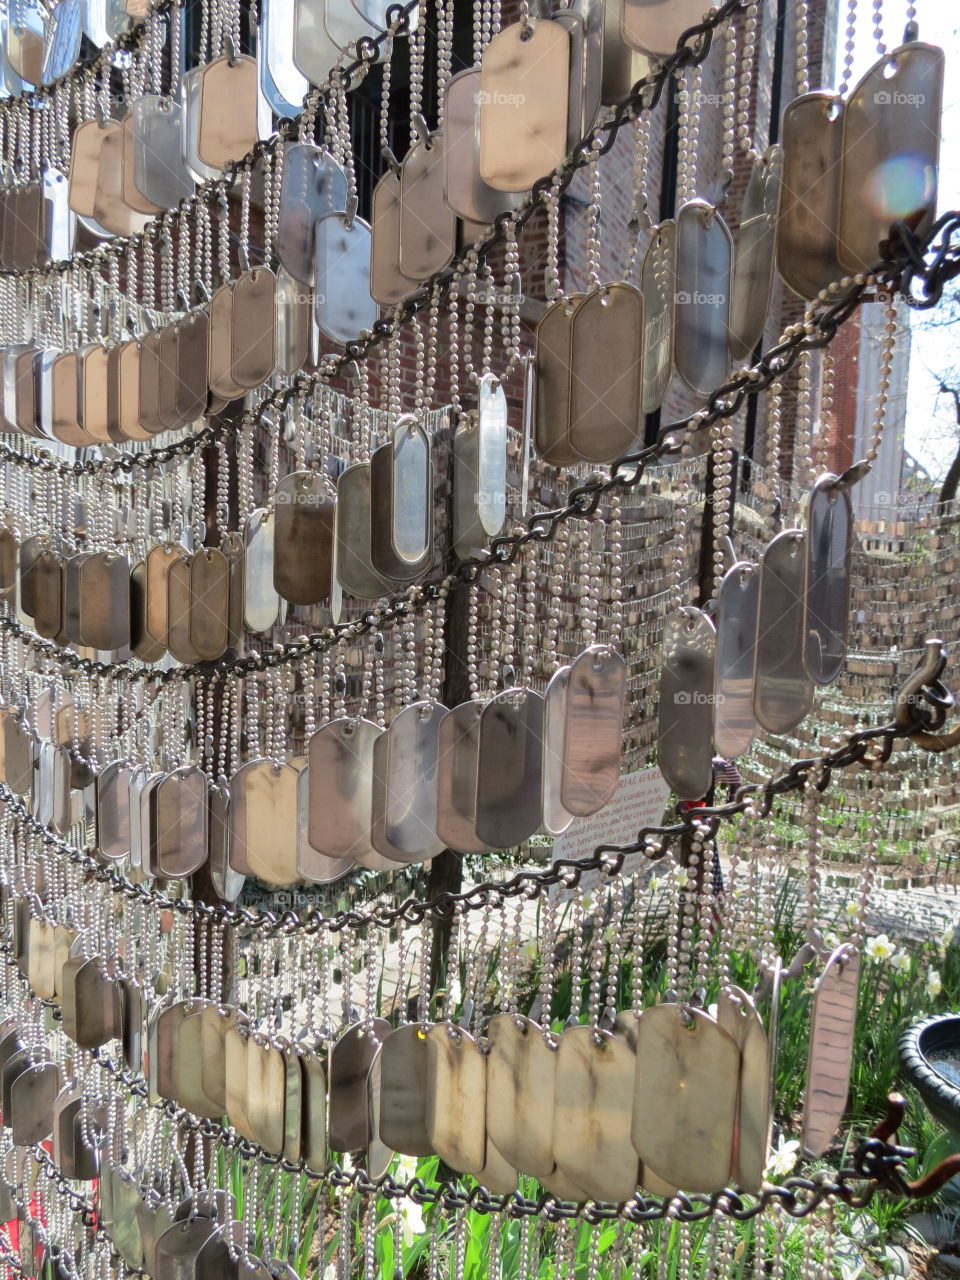 war memorial using dog tags to represent lives lost in battle